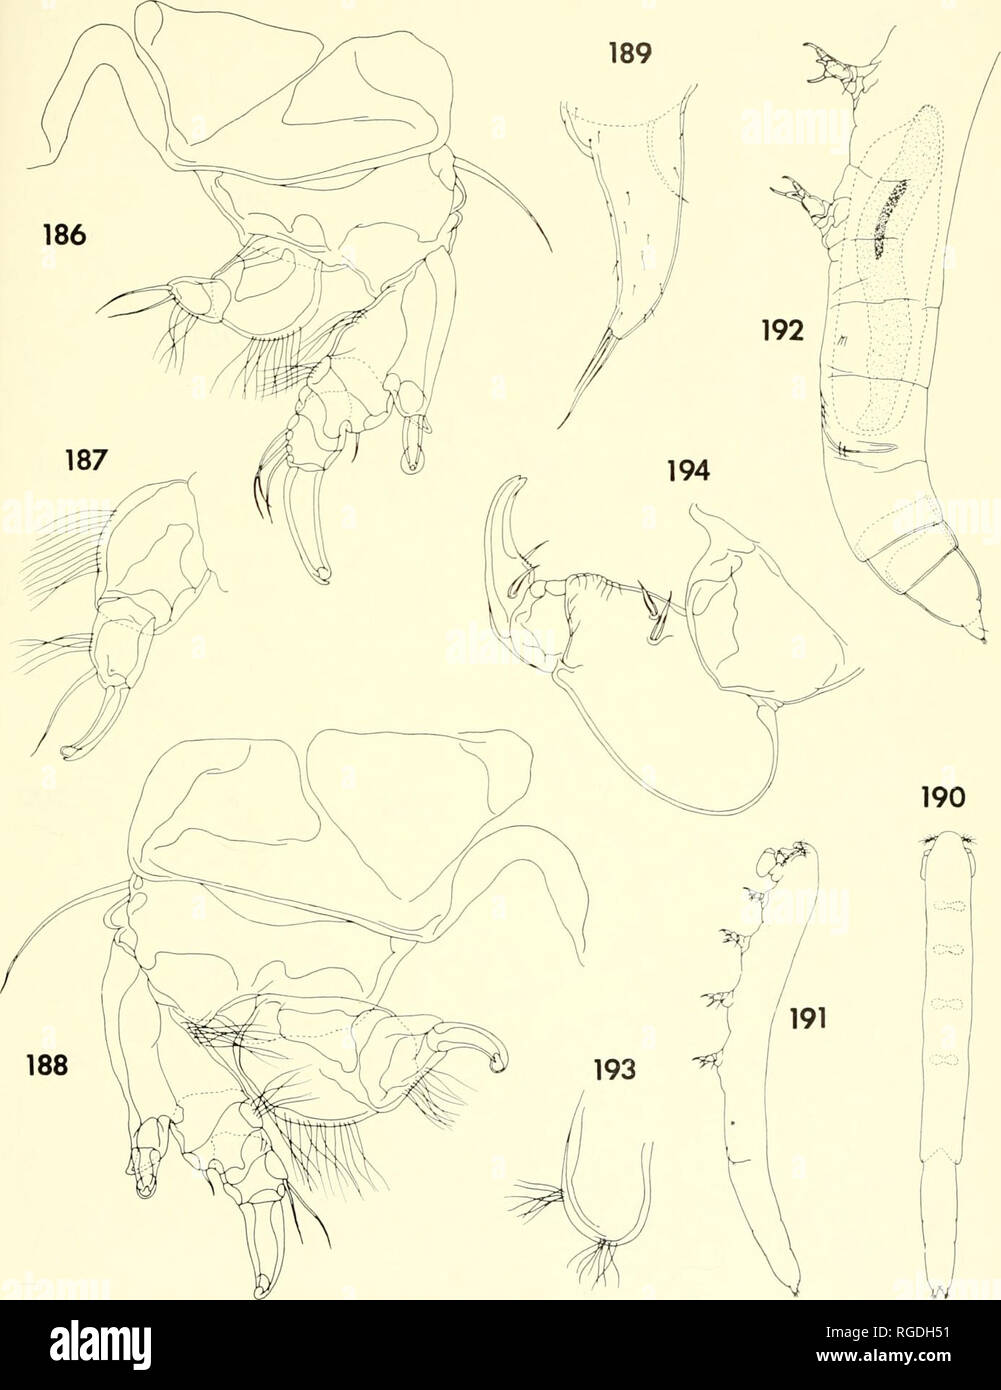 . Bulletin of the Museum of Comparative Zoology at Harvard College. Zoology. Parasitic Copepods from Corals in Madagascar • Humes and Ho 455. Figures 186-189. Xarifia hamata n. sp., female (continued). 186, leg 1 and intercoxal plate, posterior (D); 187, endopod of leg 2, posterior (D); 188, leg 3 and intercoxal plate, posterior (D); 189, leg 5, lateral (C). Figures 190-194. Xarilia hamata n. sp., male. 190, body, dorsal (A); 191, body, latera' (A); 192, posterior part of body, lateral (B); 193, paragnath, ventral (E); 194, maxilliped, inner (C).. Please note that these images are extracted fr Stock Photo